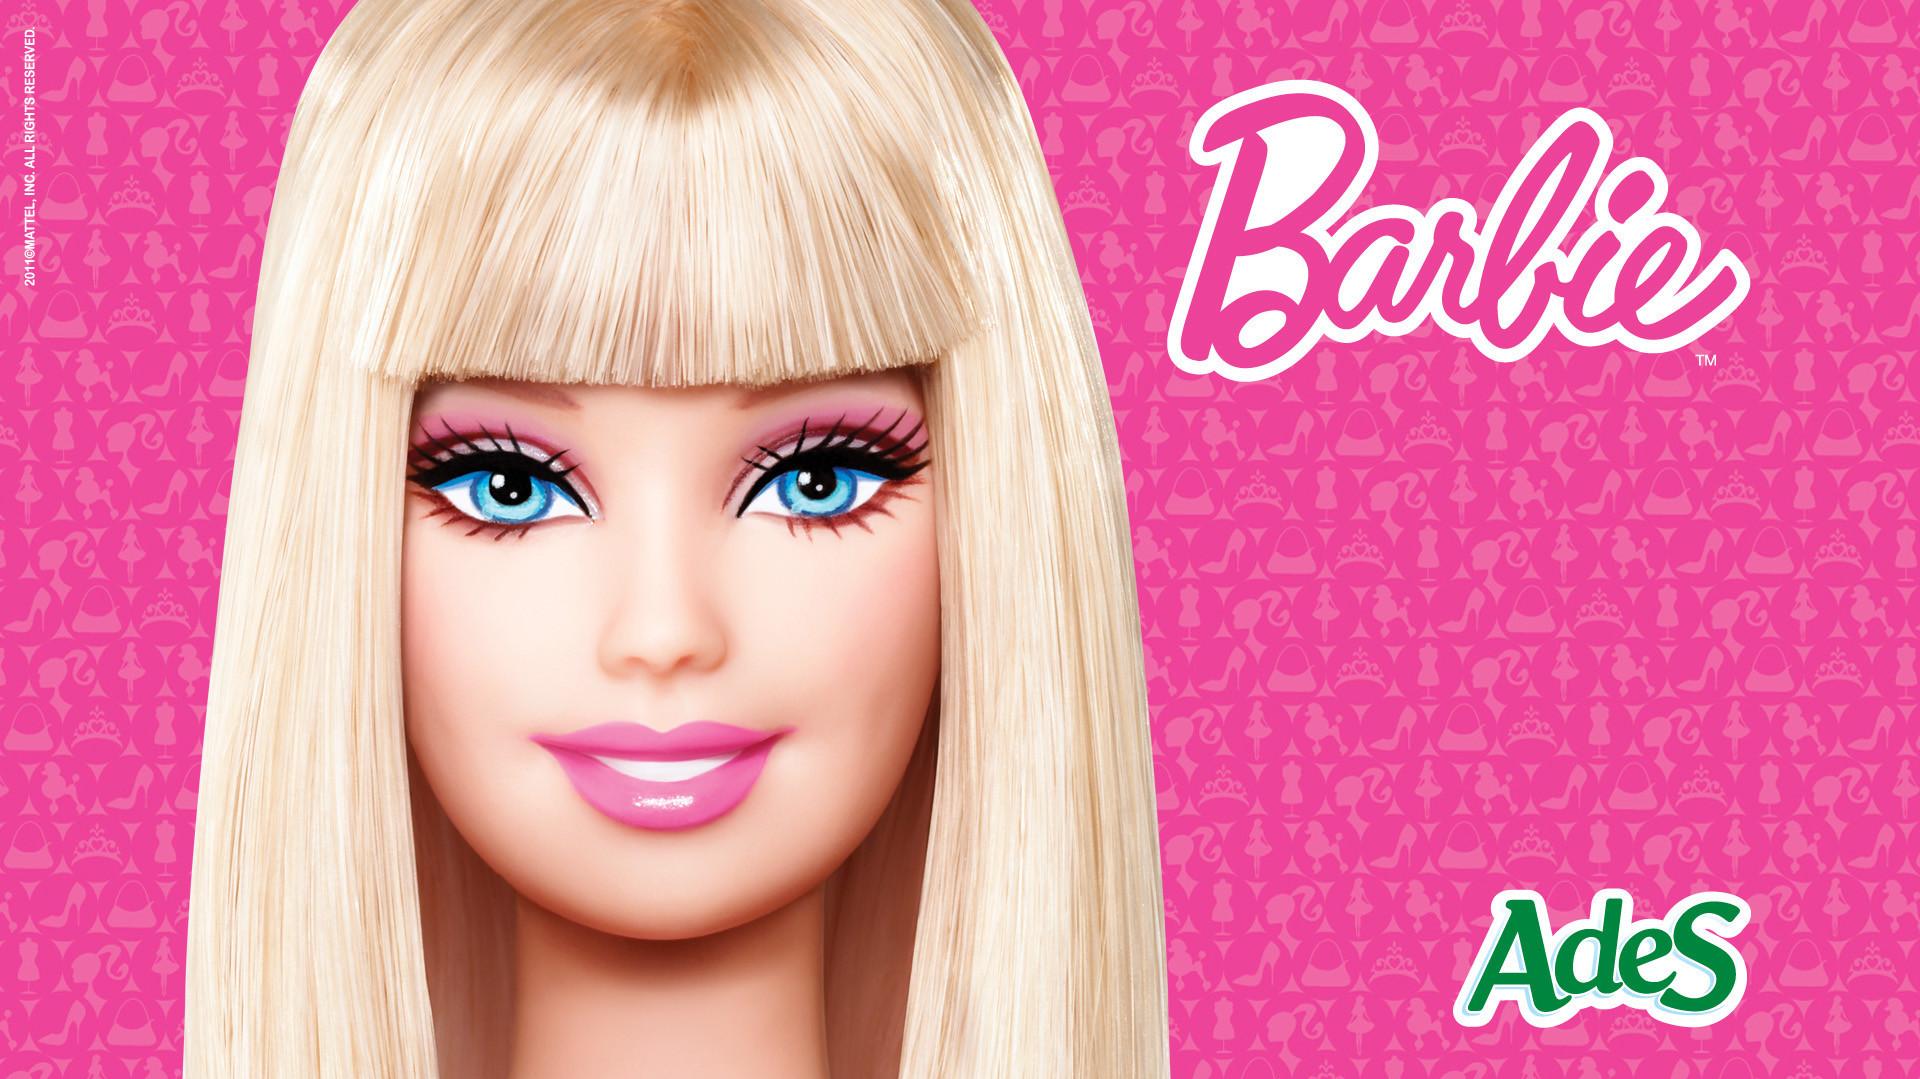 Wallpaper Of Barbie On Pictures